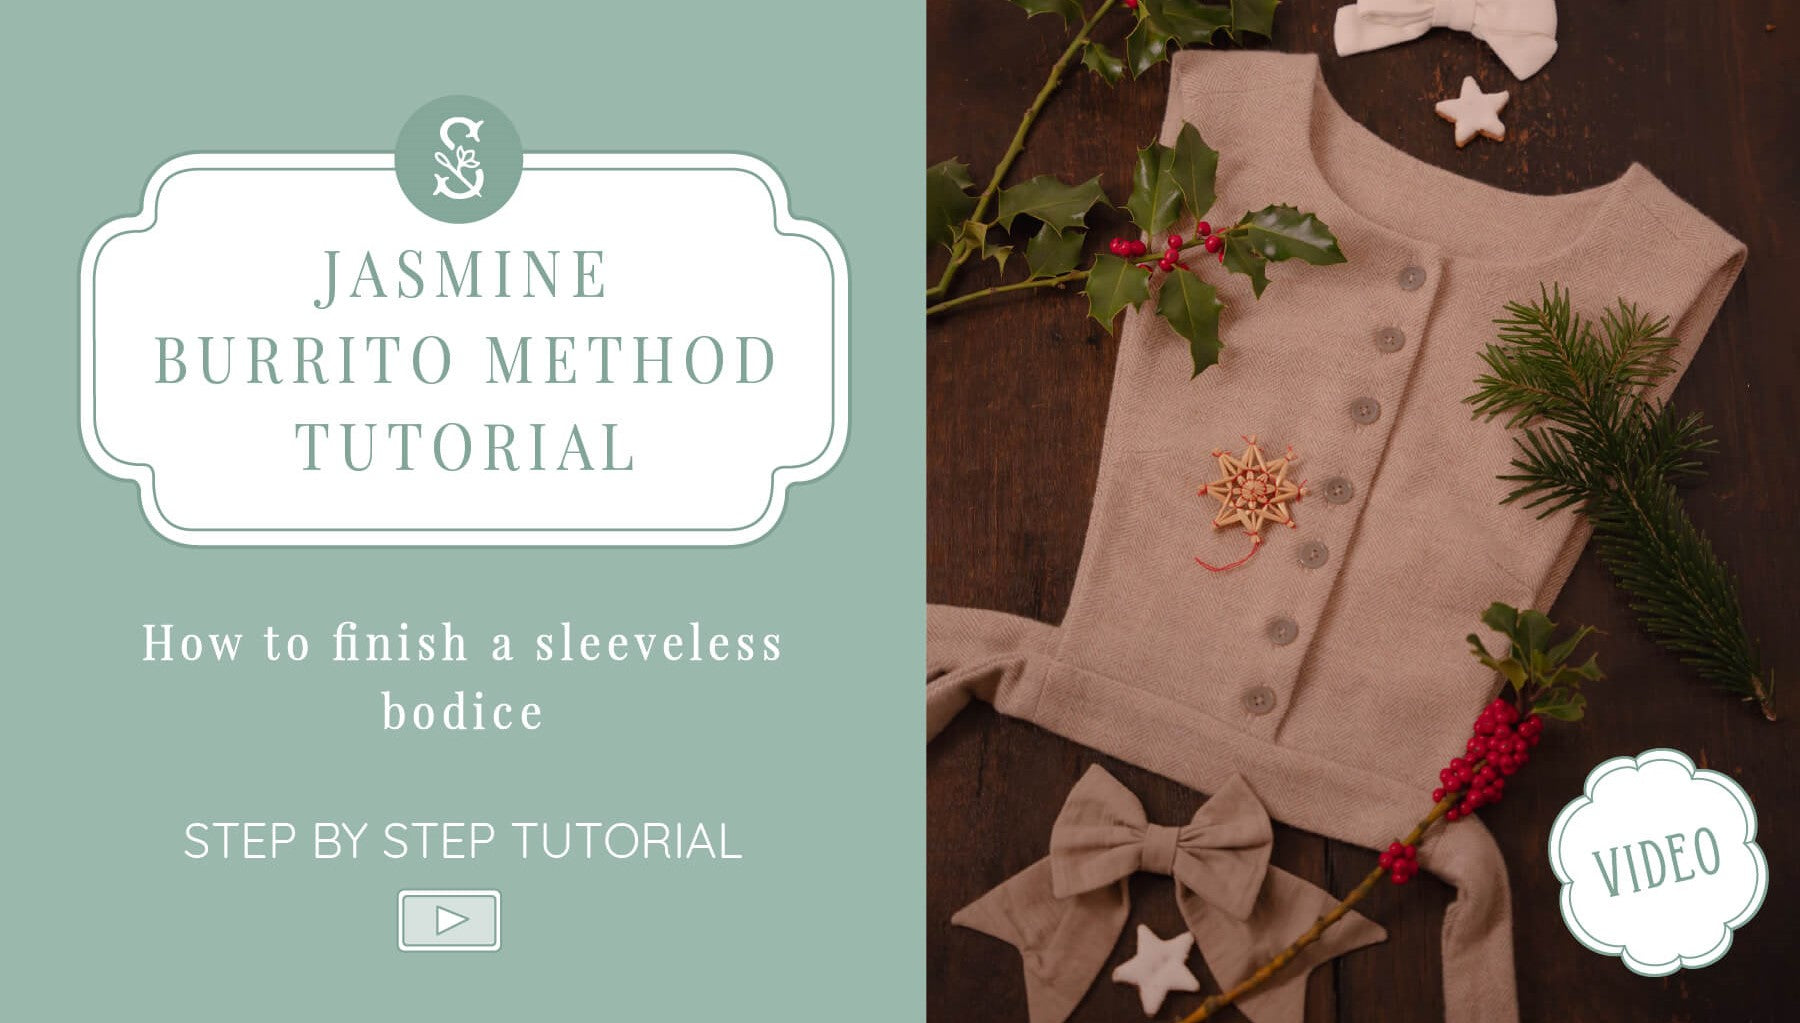 Tutorial: How to sew the Burrito Method on a fully lined sleeveless garment - A Jasmine Pinafore Tutorial